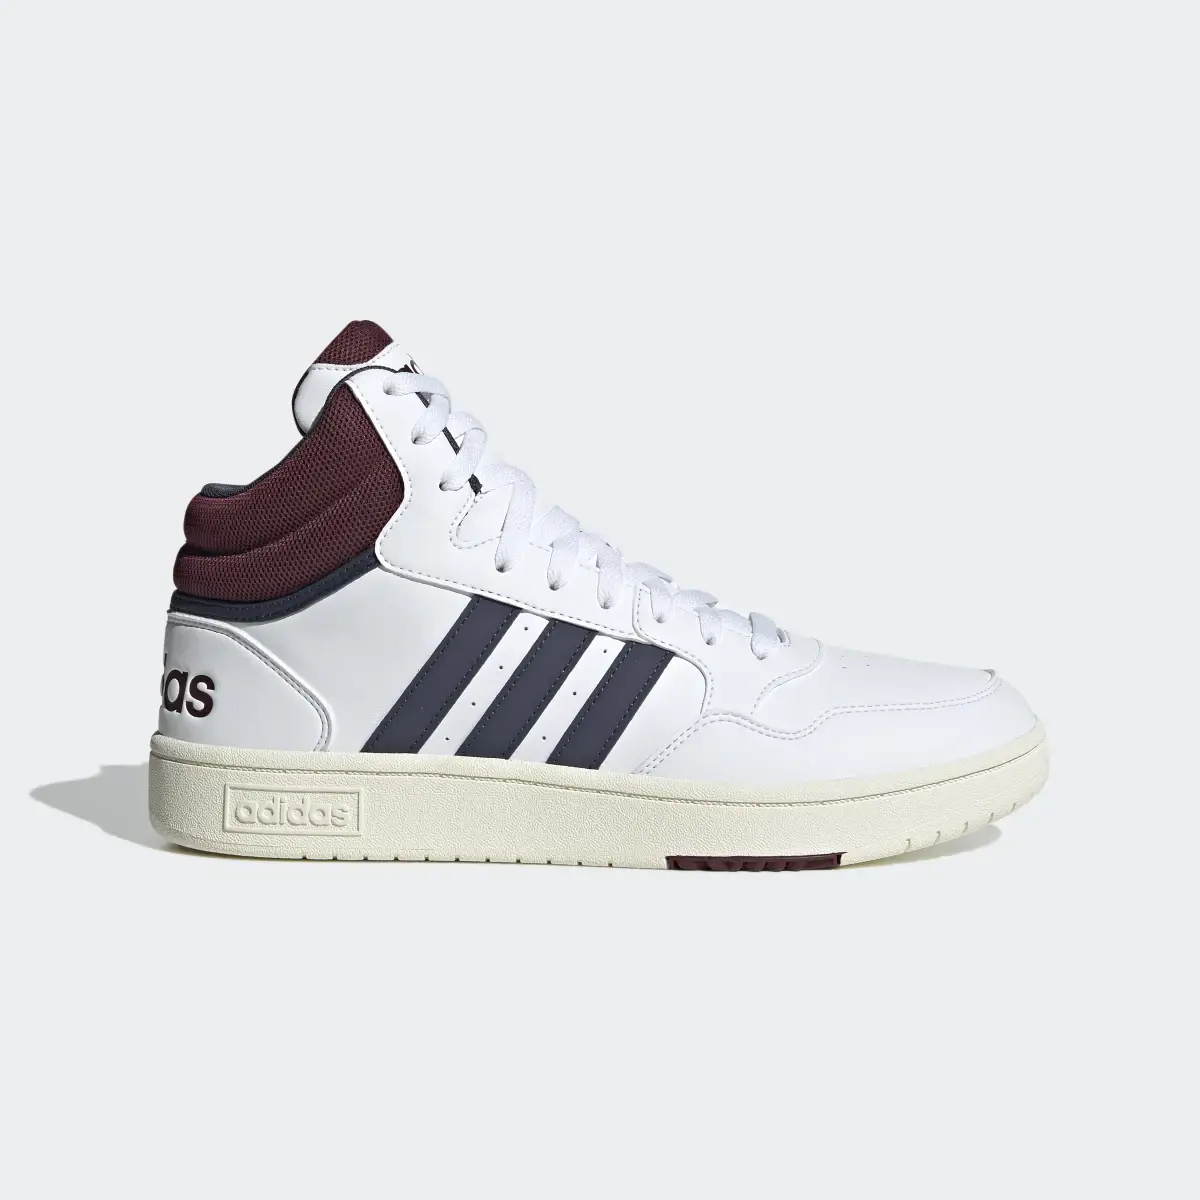 Adidas Chaussure Hoops 3.0 Mid Lifestyle Basketball Classic Vintage. 2